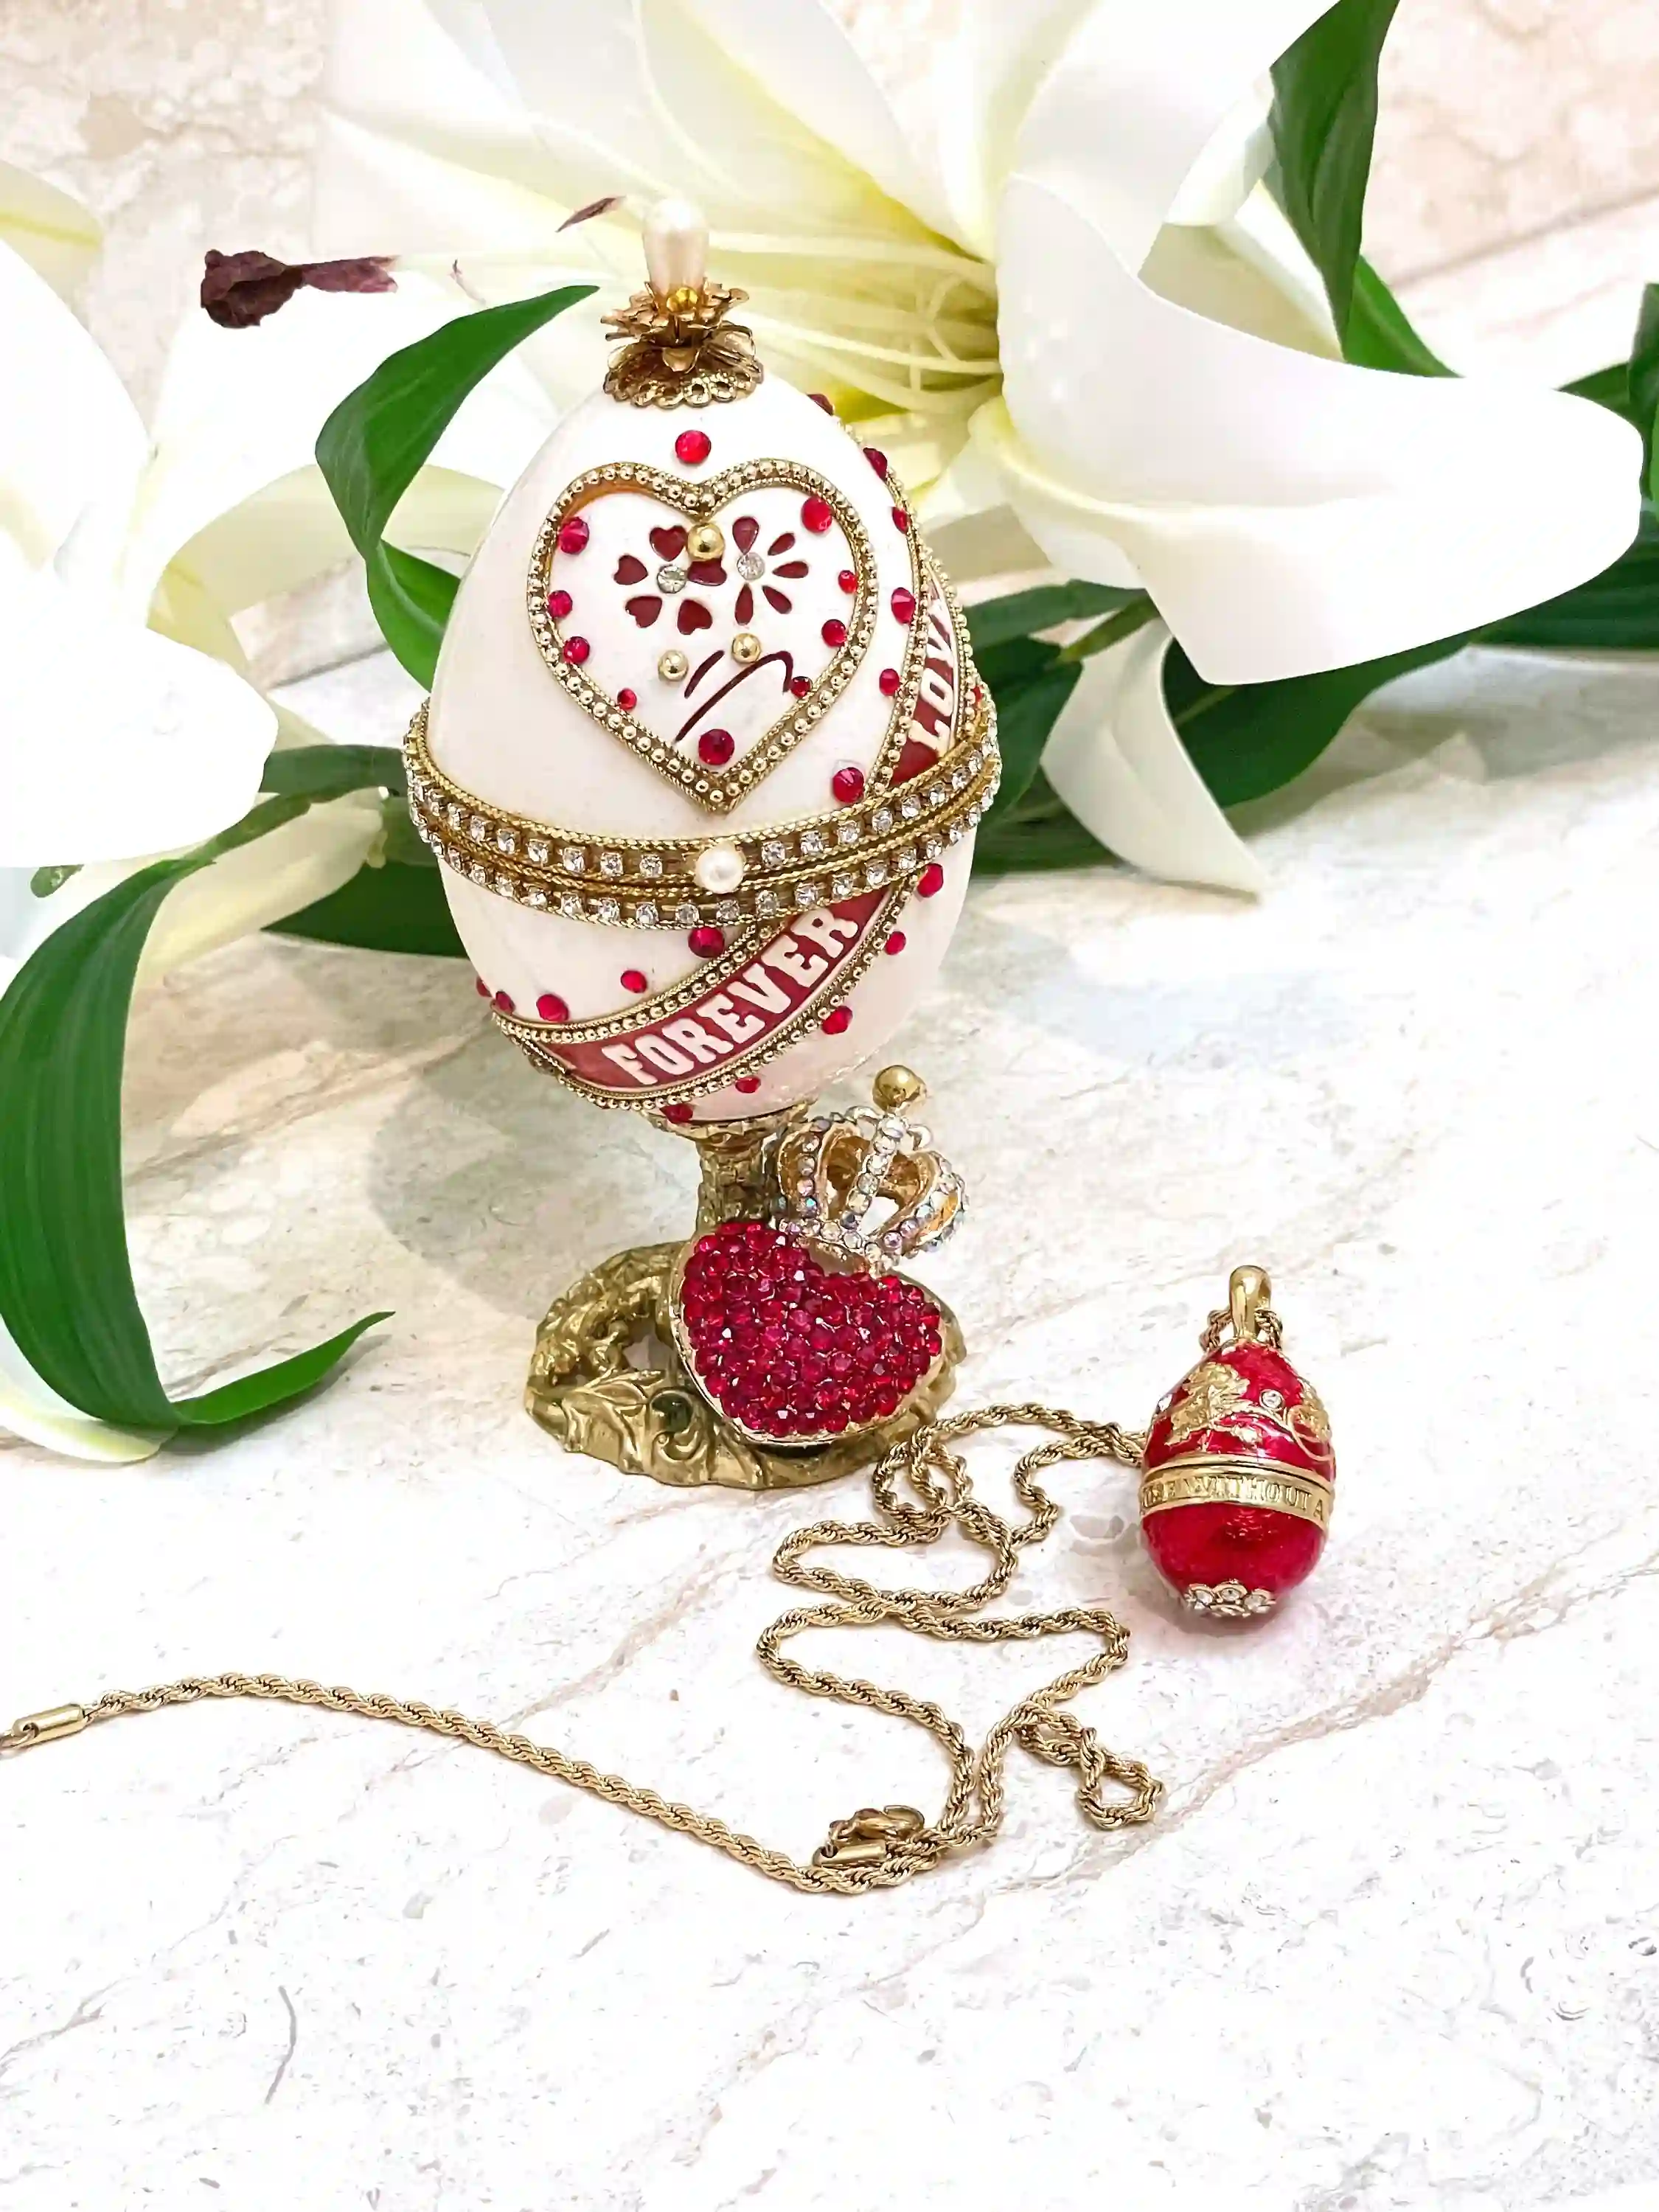 Musical Faberge egg Art, I Love You gift for Wife gift Ideas, 21 st Birthday gift from Dad, 21 Anniversary gift for her,24k Gold -Swarovski 